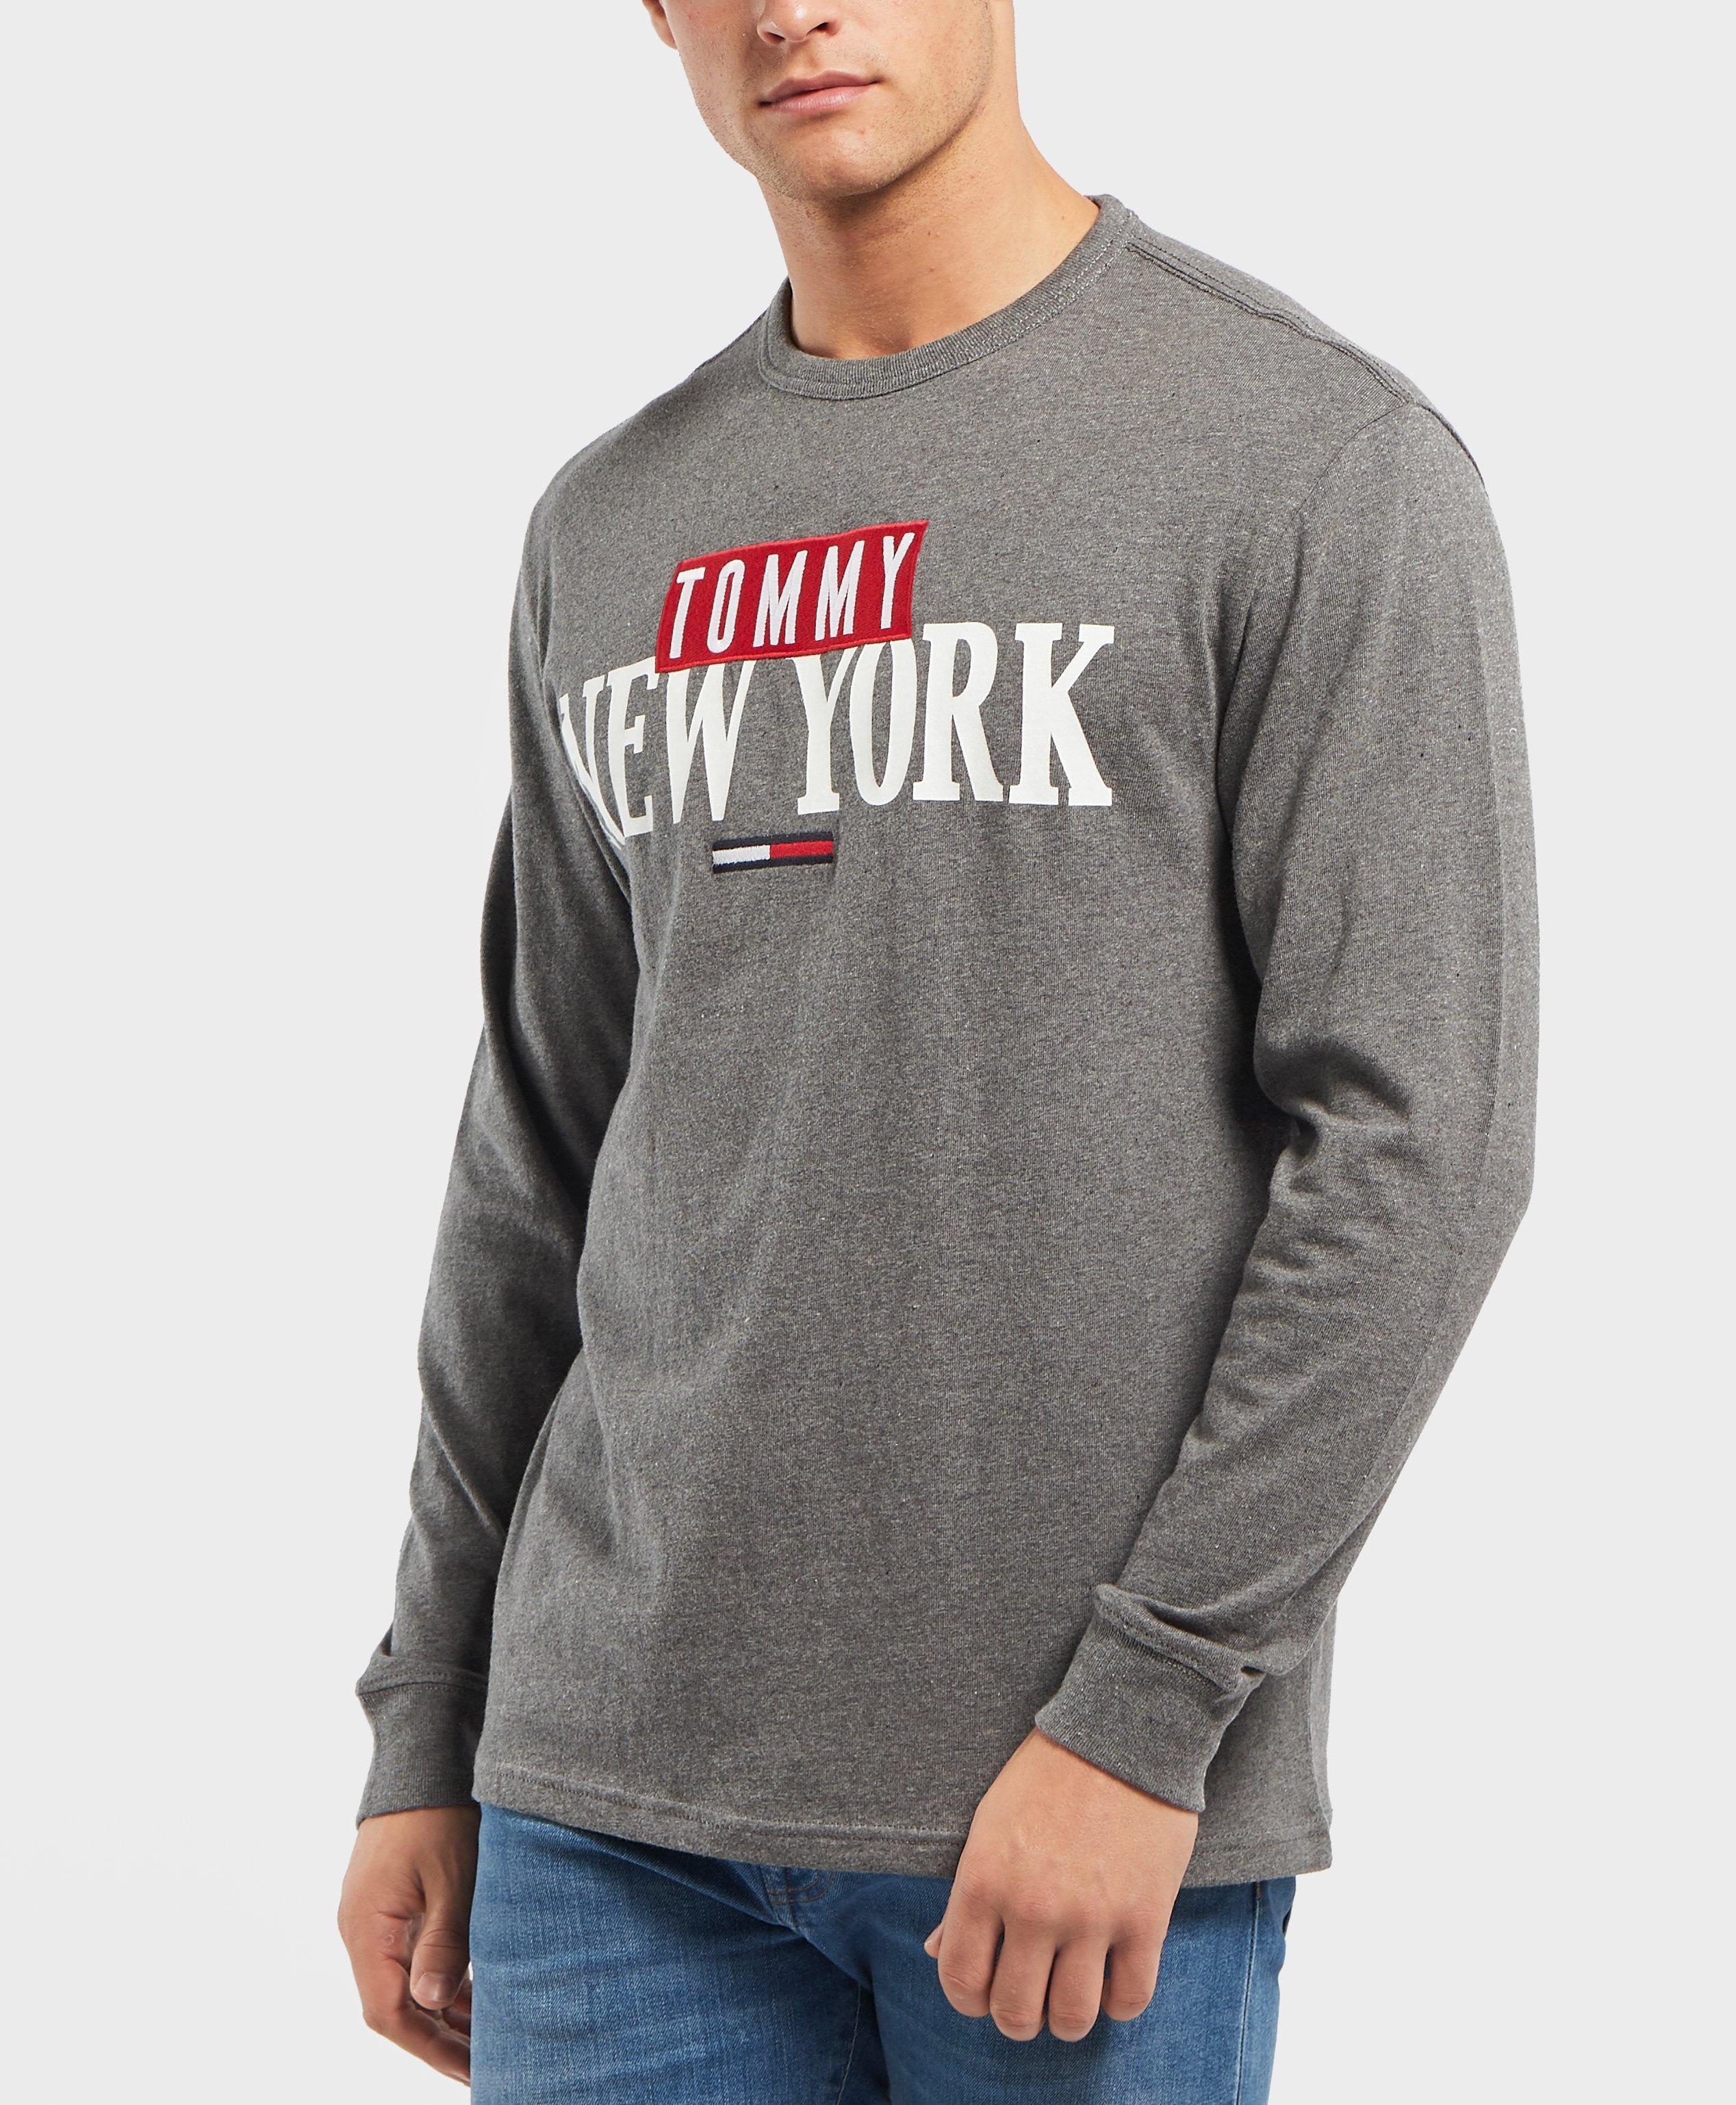 Tommy Hilfiger Cotton New York Long Sleeve T-shirt in Gray for Men - Lyst